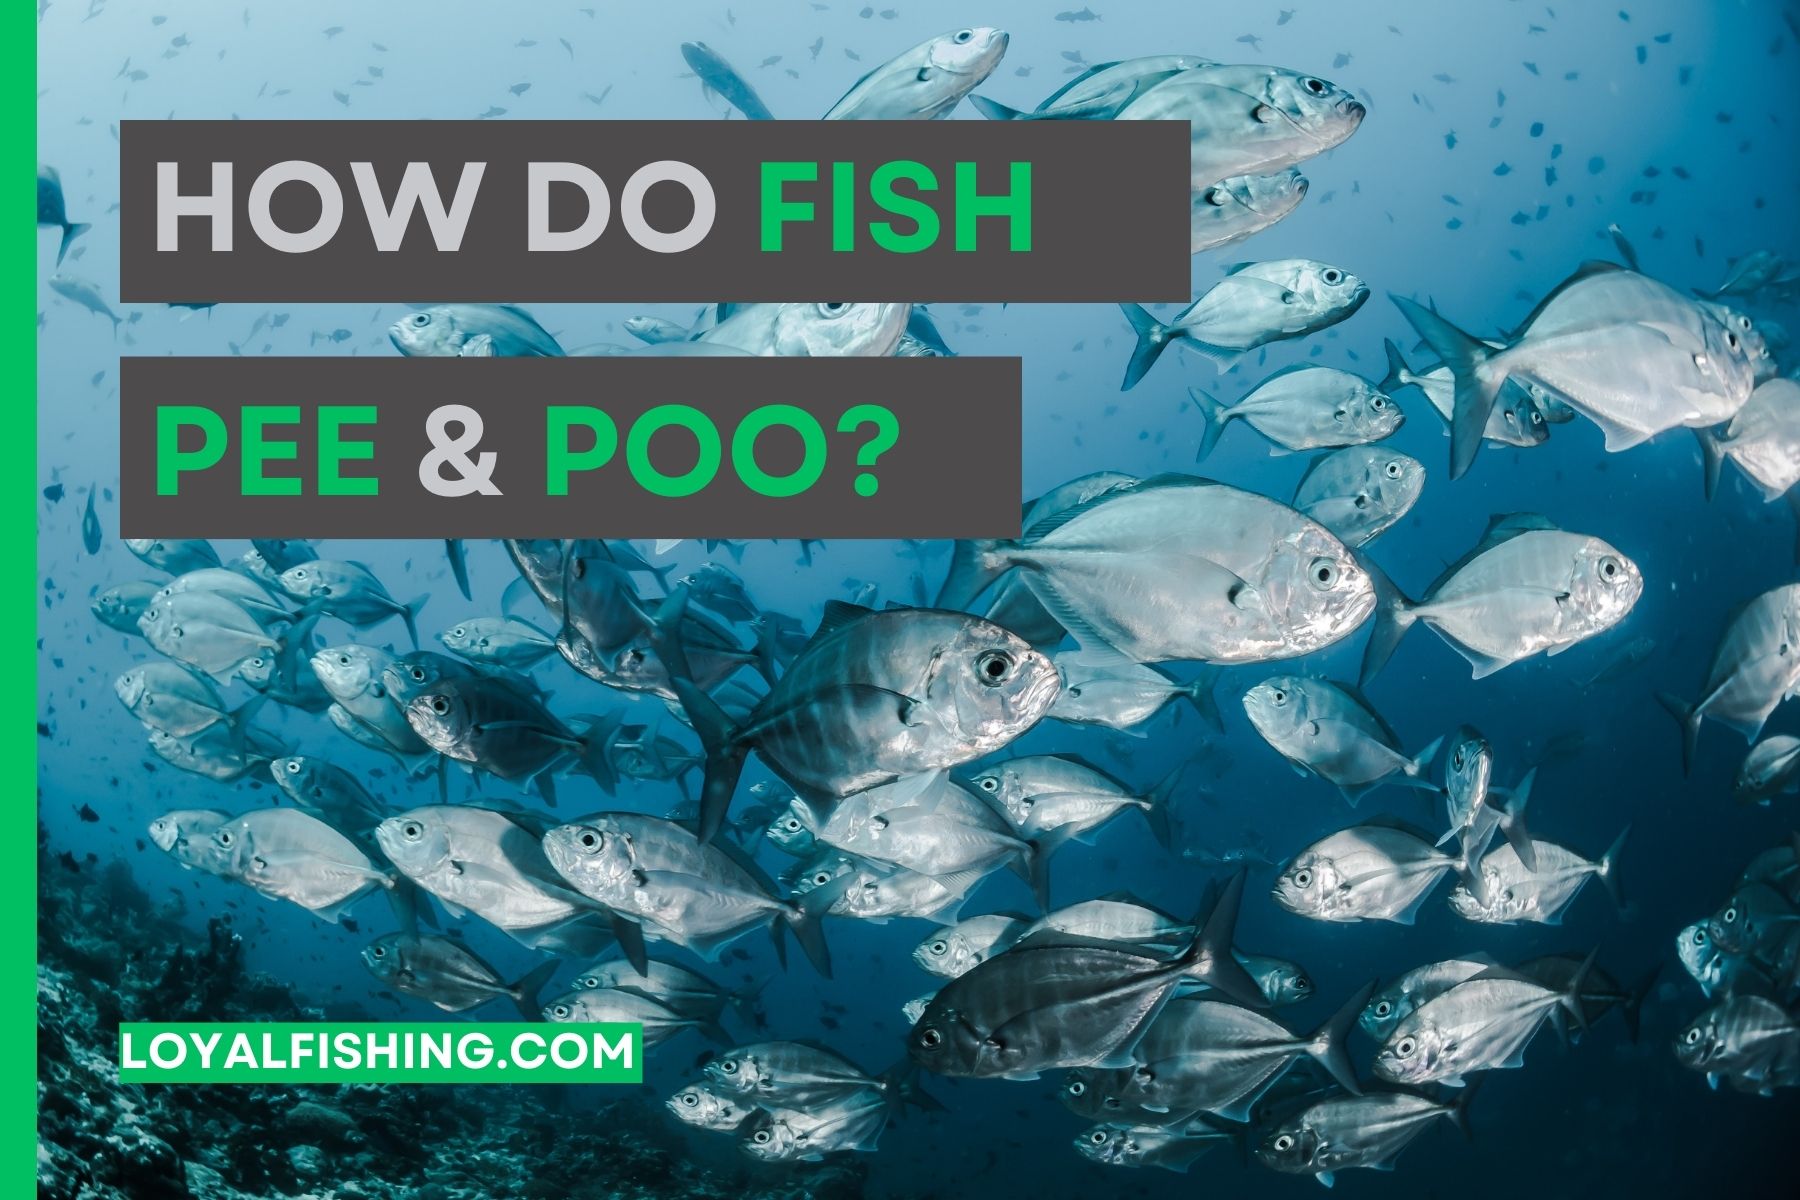 How do Fish Pee and Poo